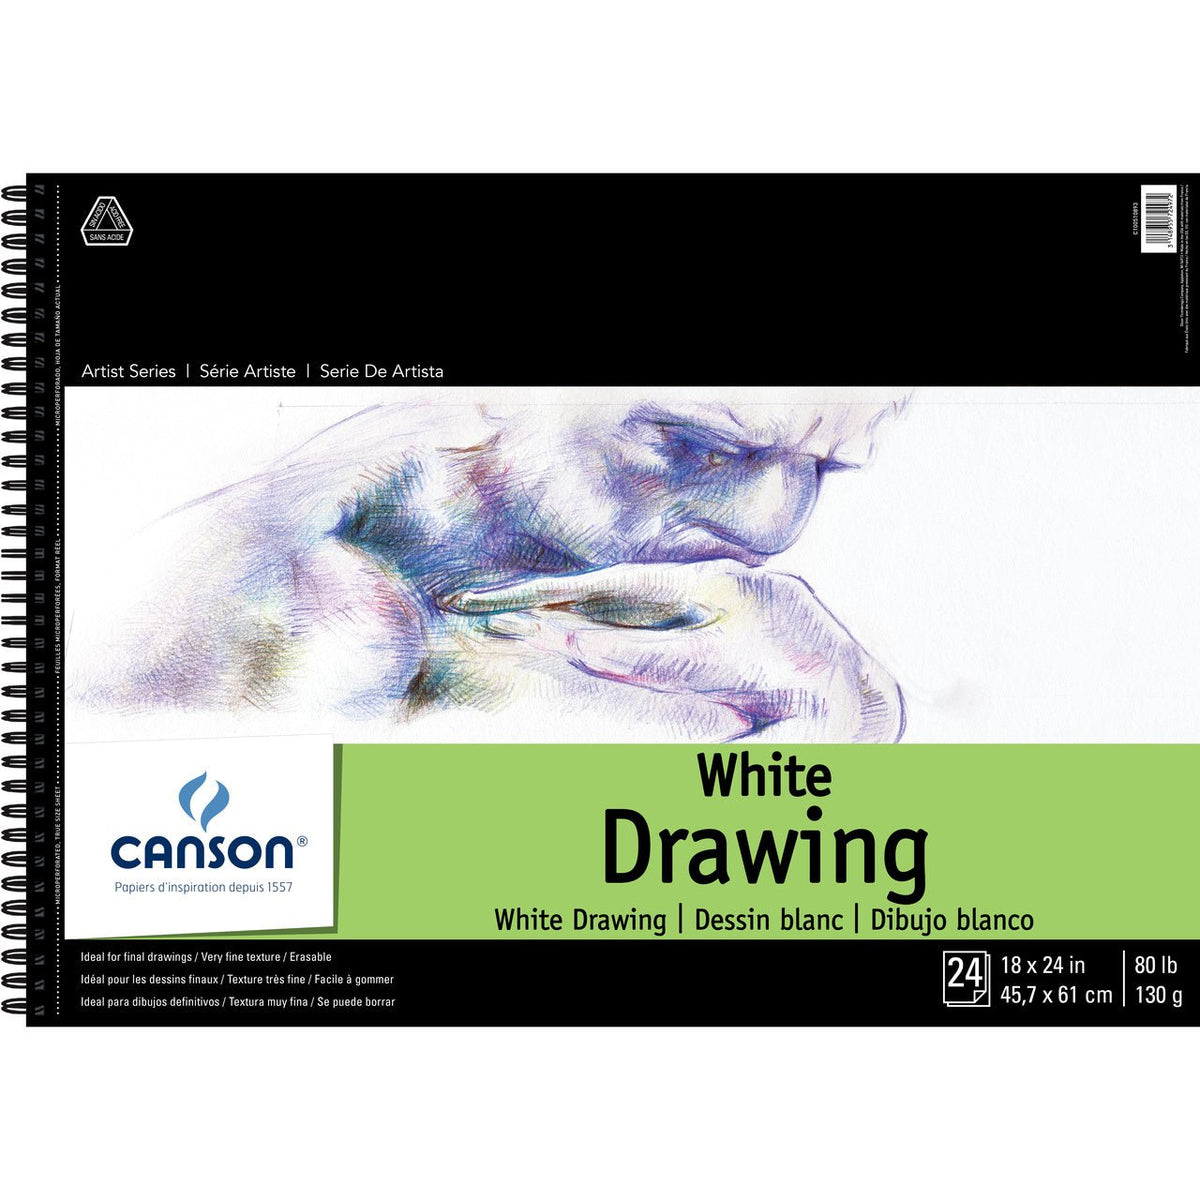 Canson Pure White 80 lb Drawing Pad 18x24 inch - merriartist.com